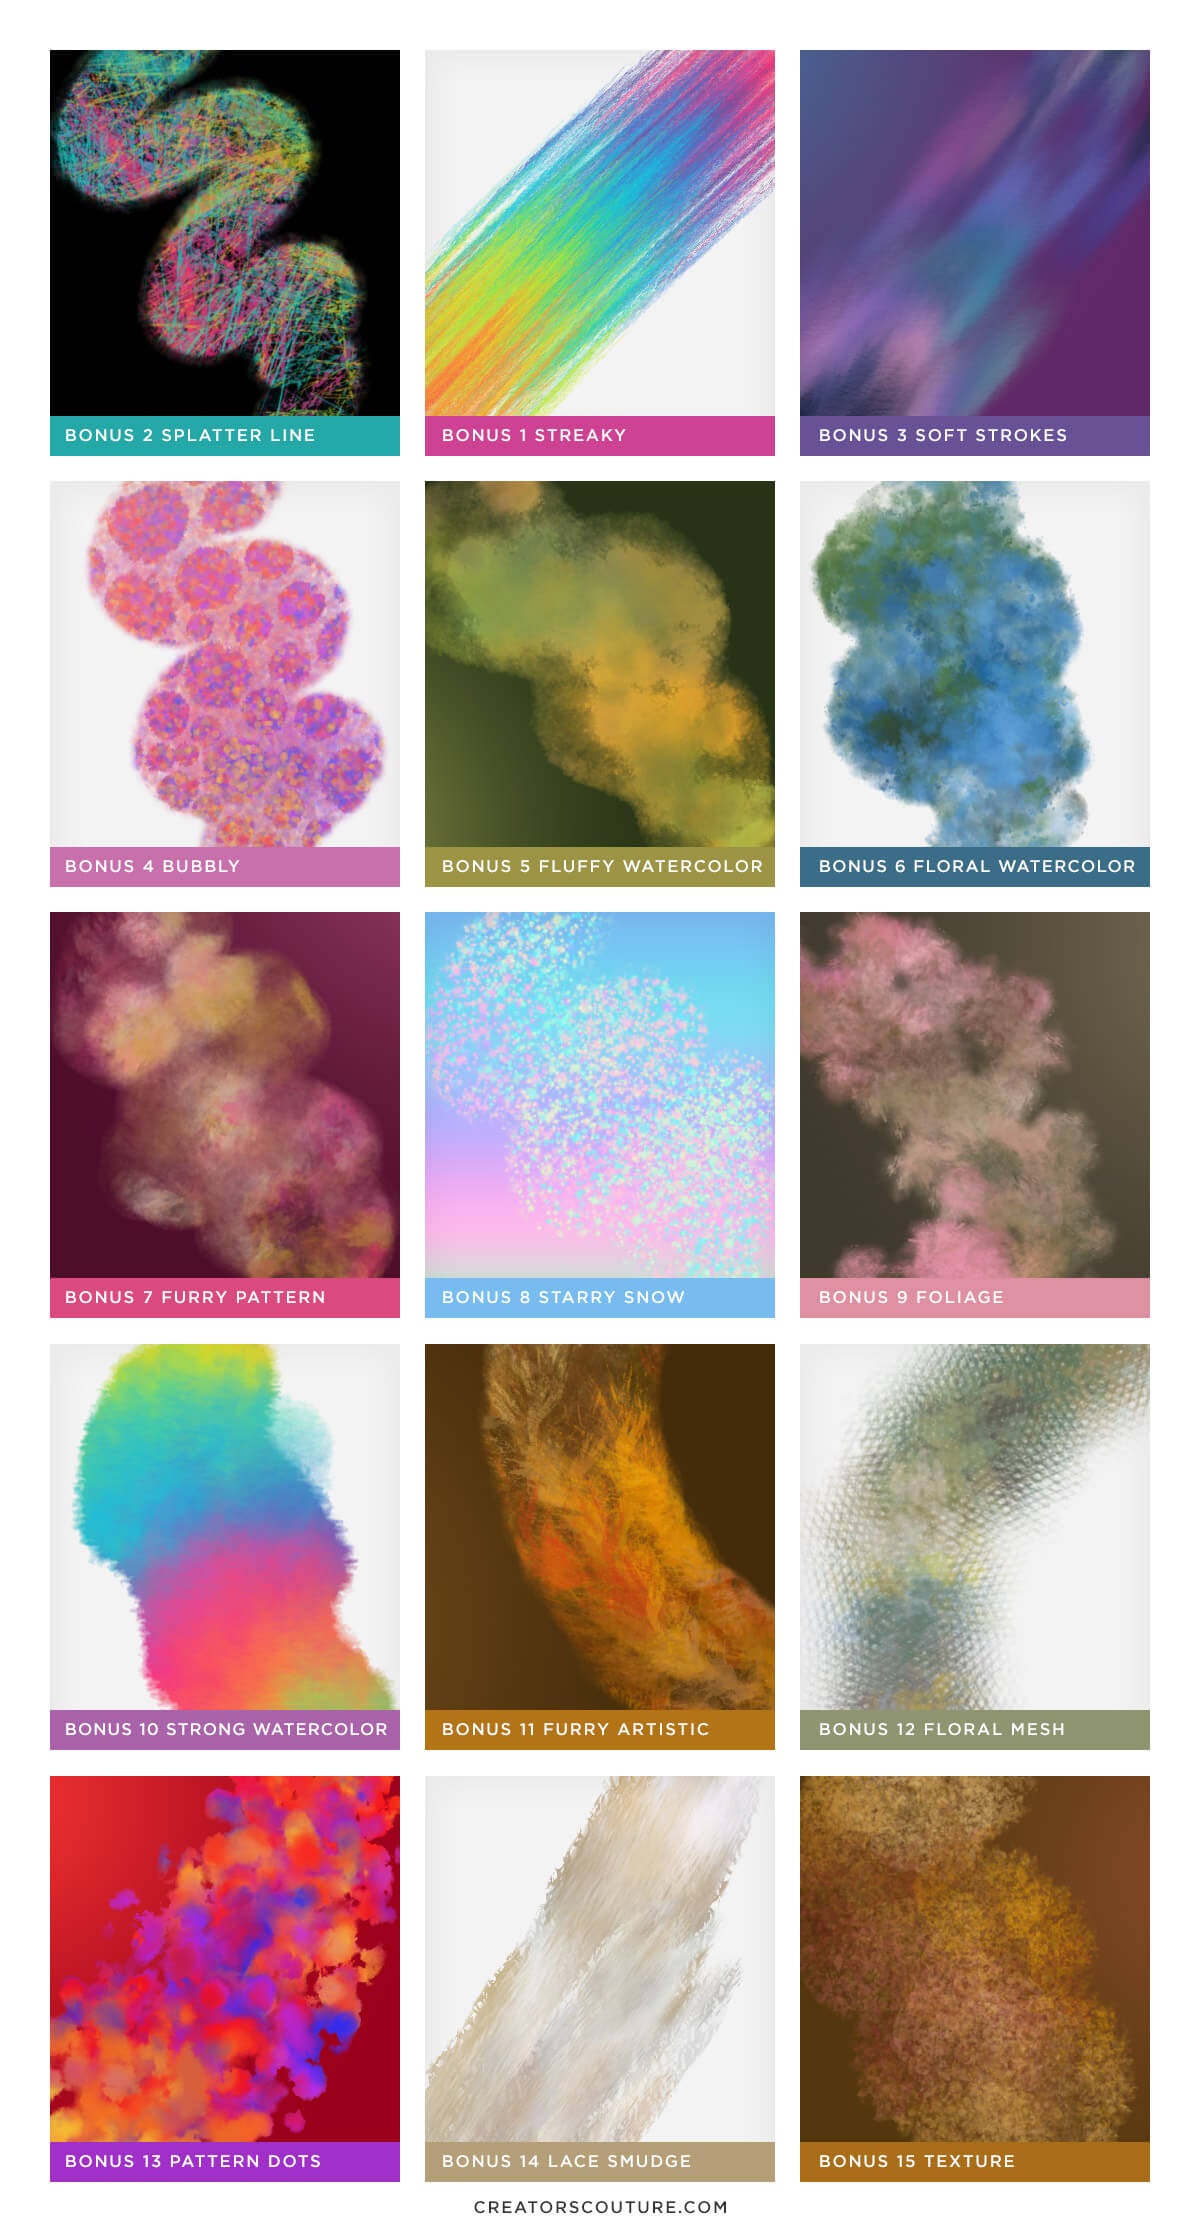 preview image of special effects photoshop brushes, including floral, pattern, and watercolor inspired Photoshop brushes